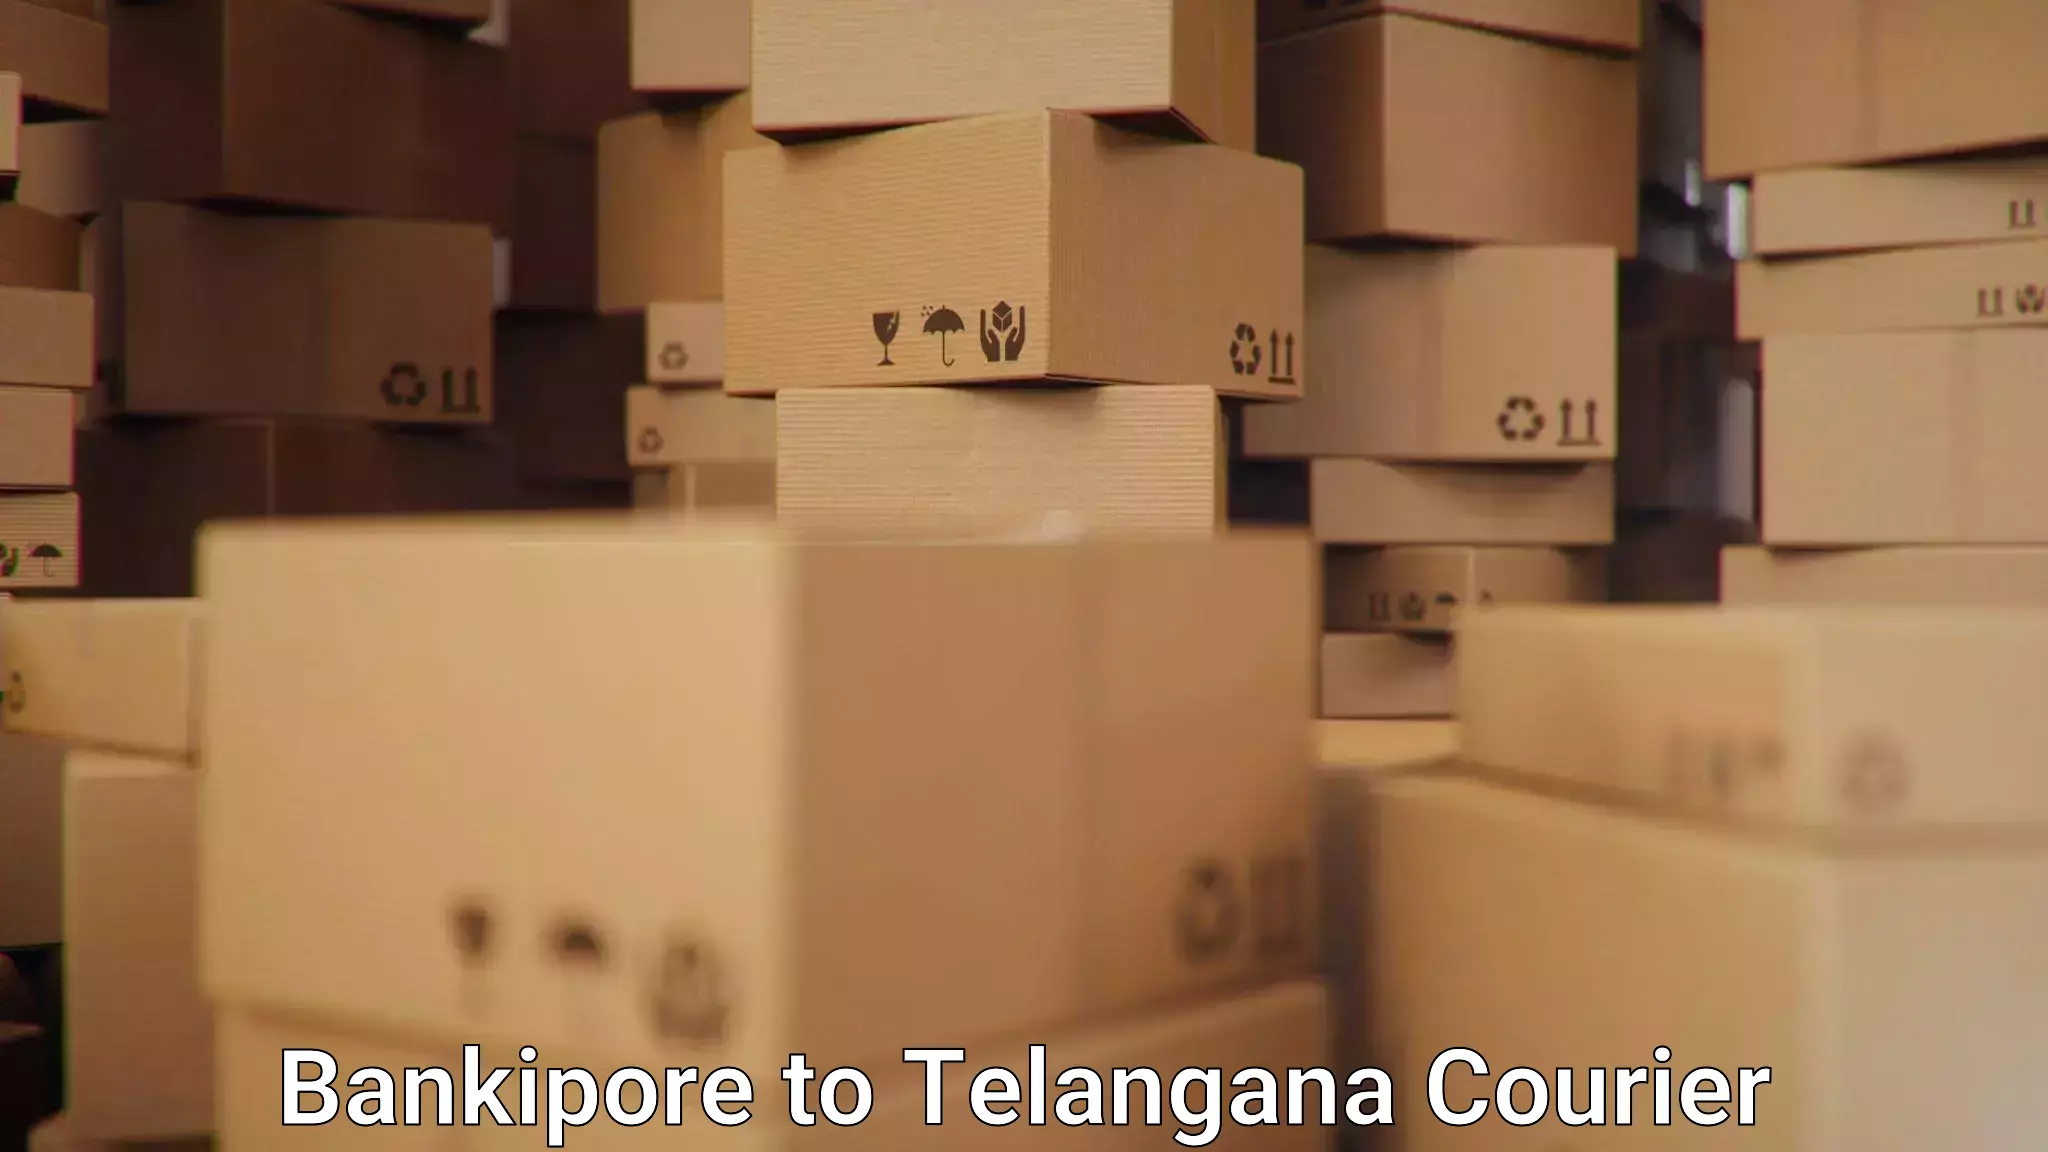 International courier networks Bankipore to Telangana